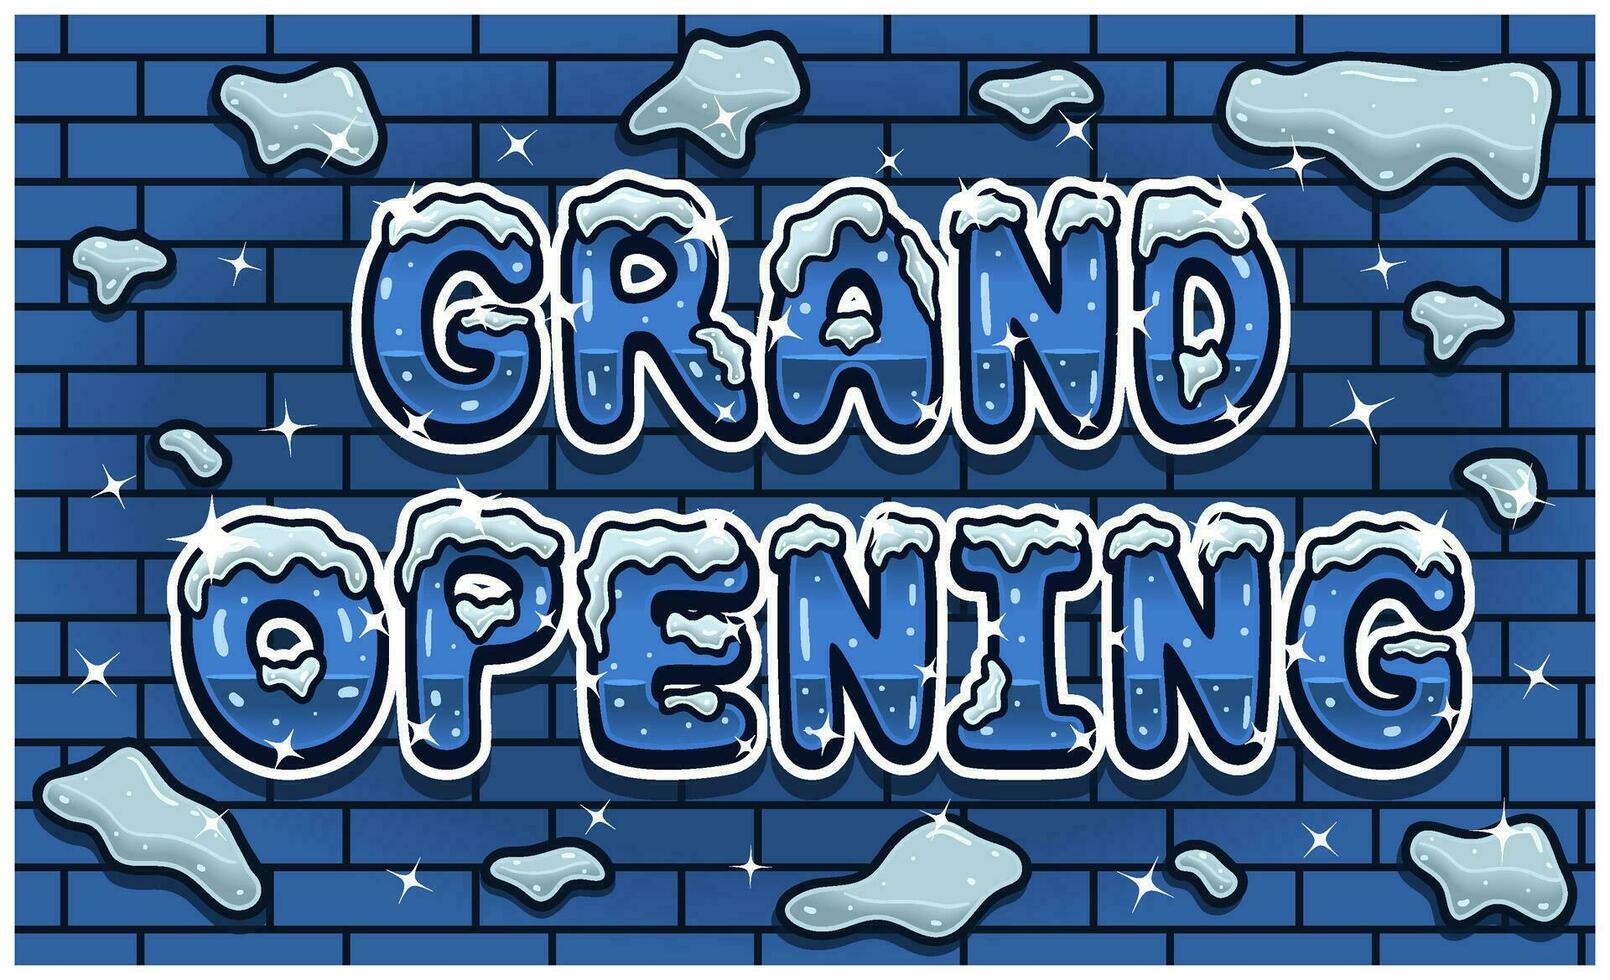 Grand Opening Lettering With Snow Ice Font In Brick Wall Background For Sign Template. Text Effect and Simple Gradients. vector